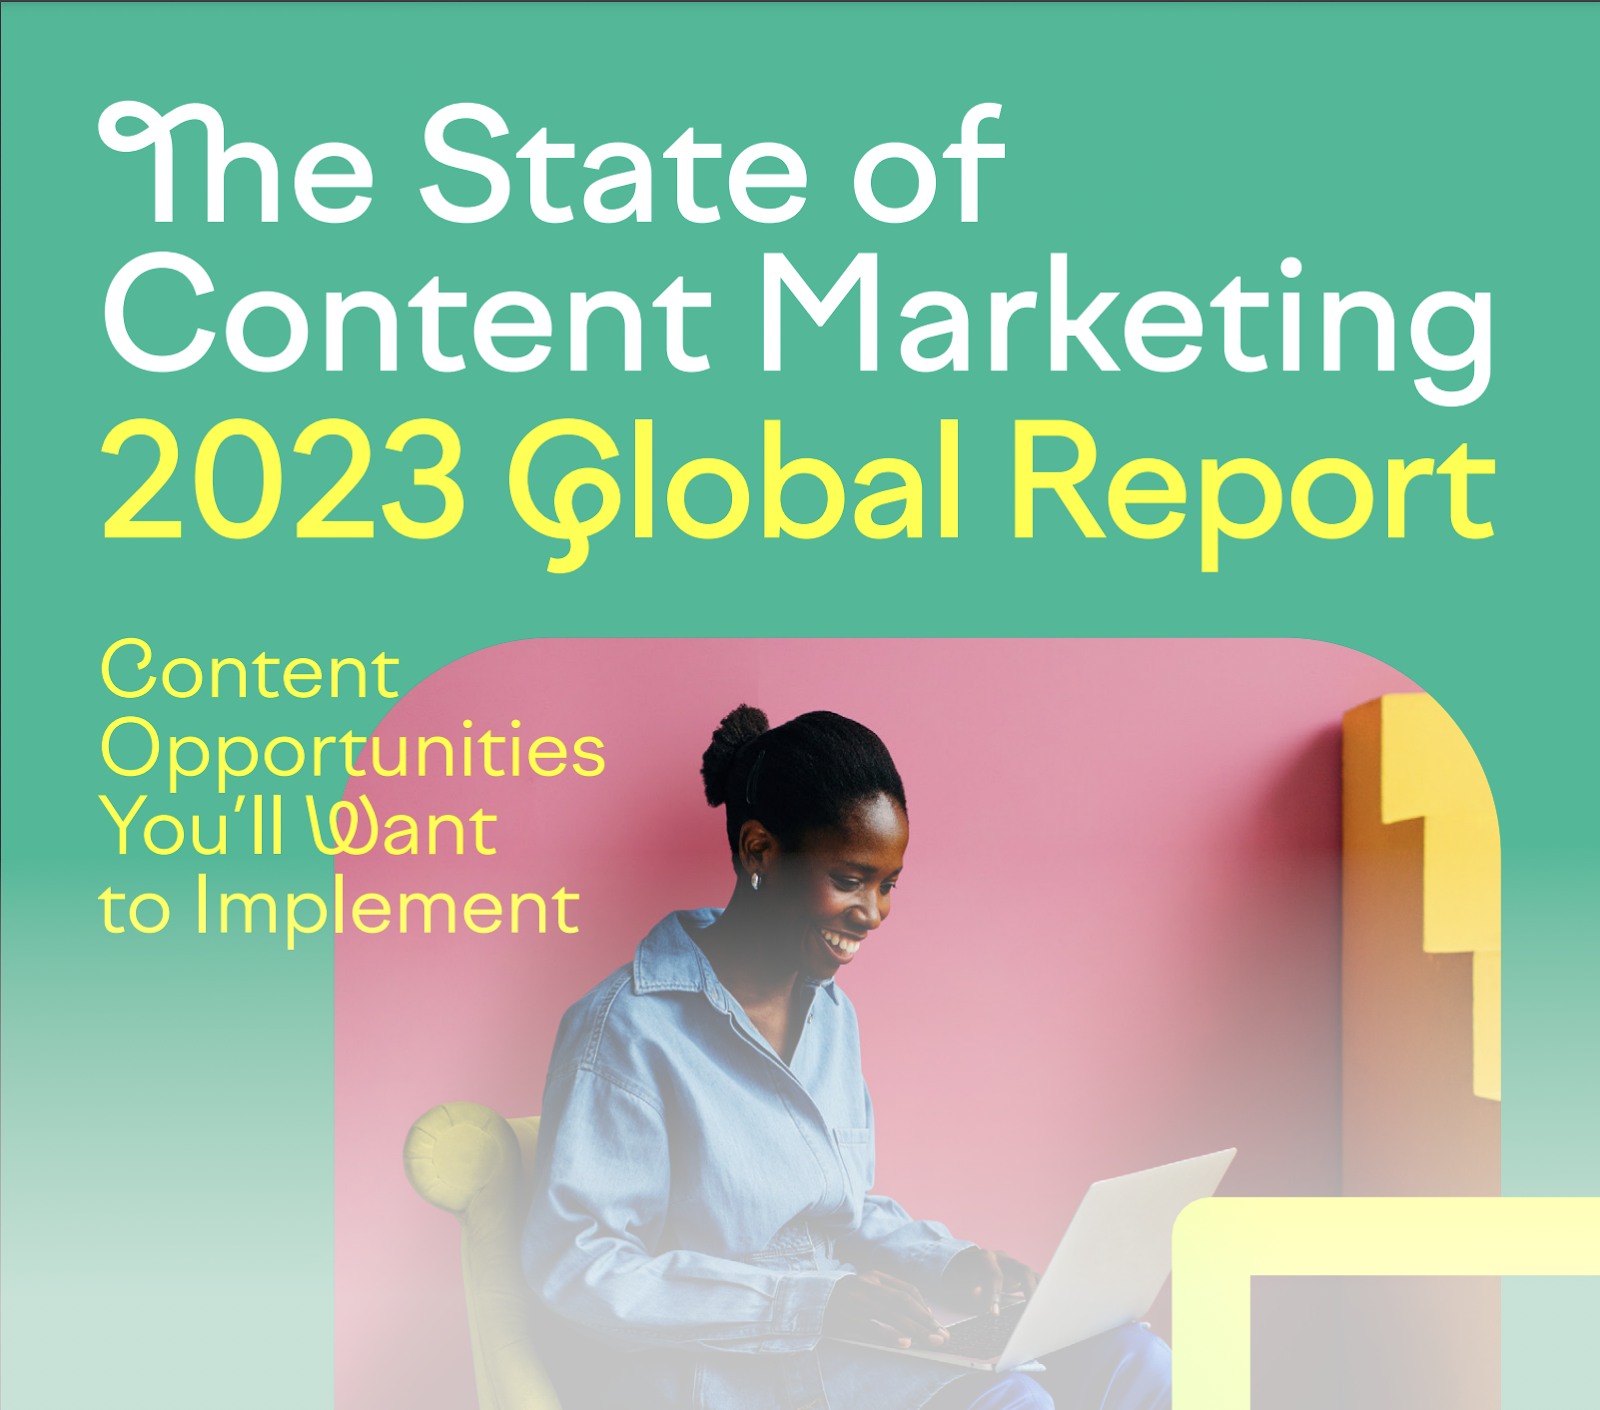 The State of Content Marketing 2023 Global Report